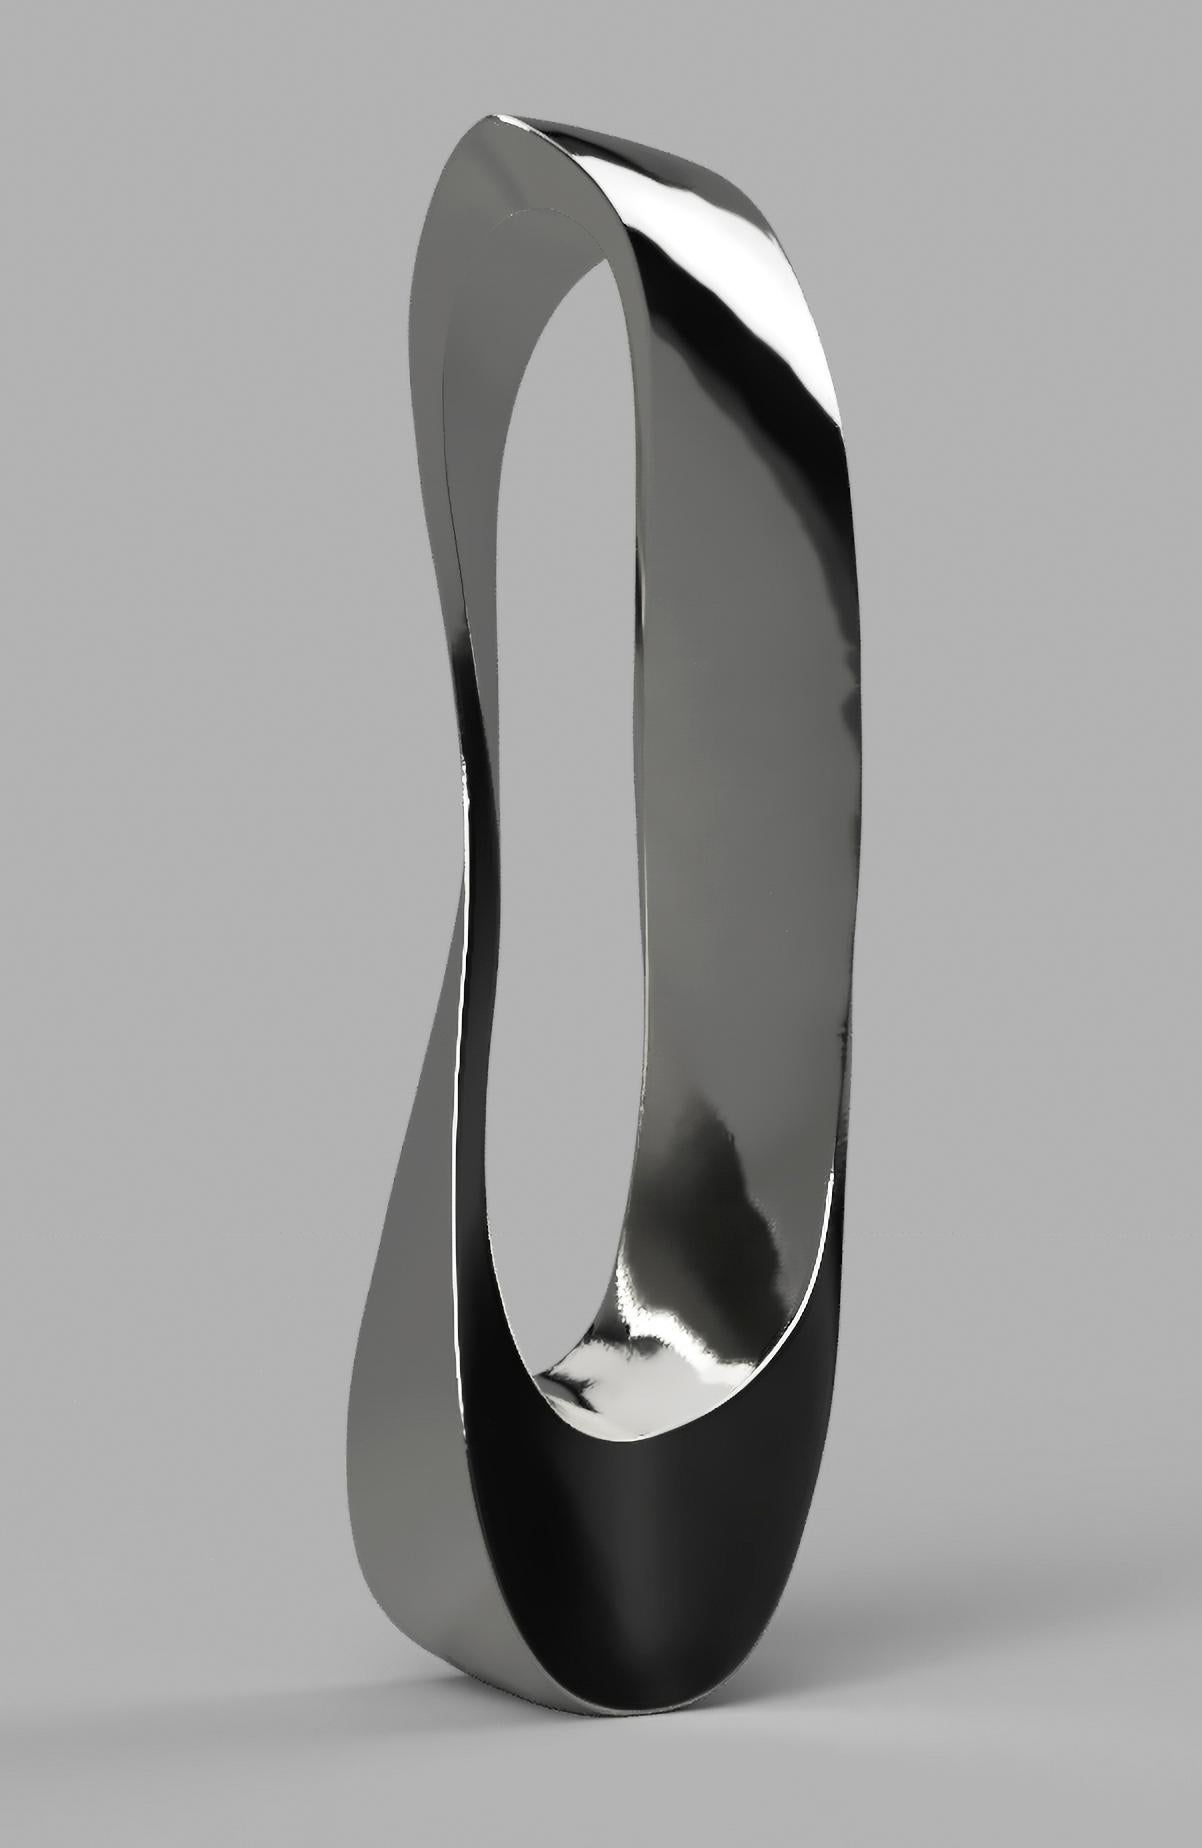 Lyrical and elegant in form, Jeremy Guy’s contemporary sculptures are simply stunning. 
This is Mobius; one of a series of larger pieces Guy produced to be displayed outdoors. The distinctive shape of the mobius strip—a mathematical construct is